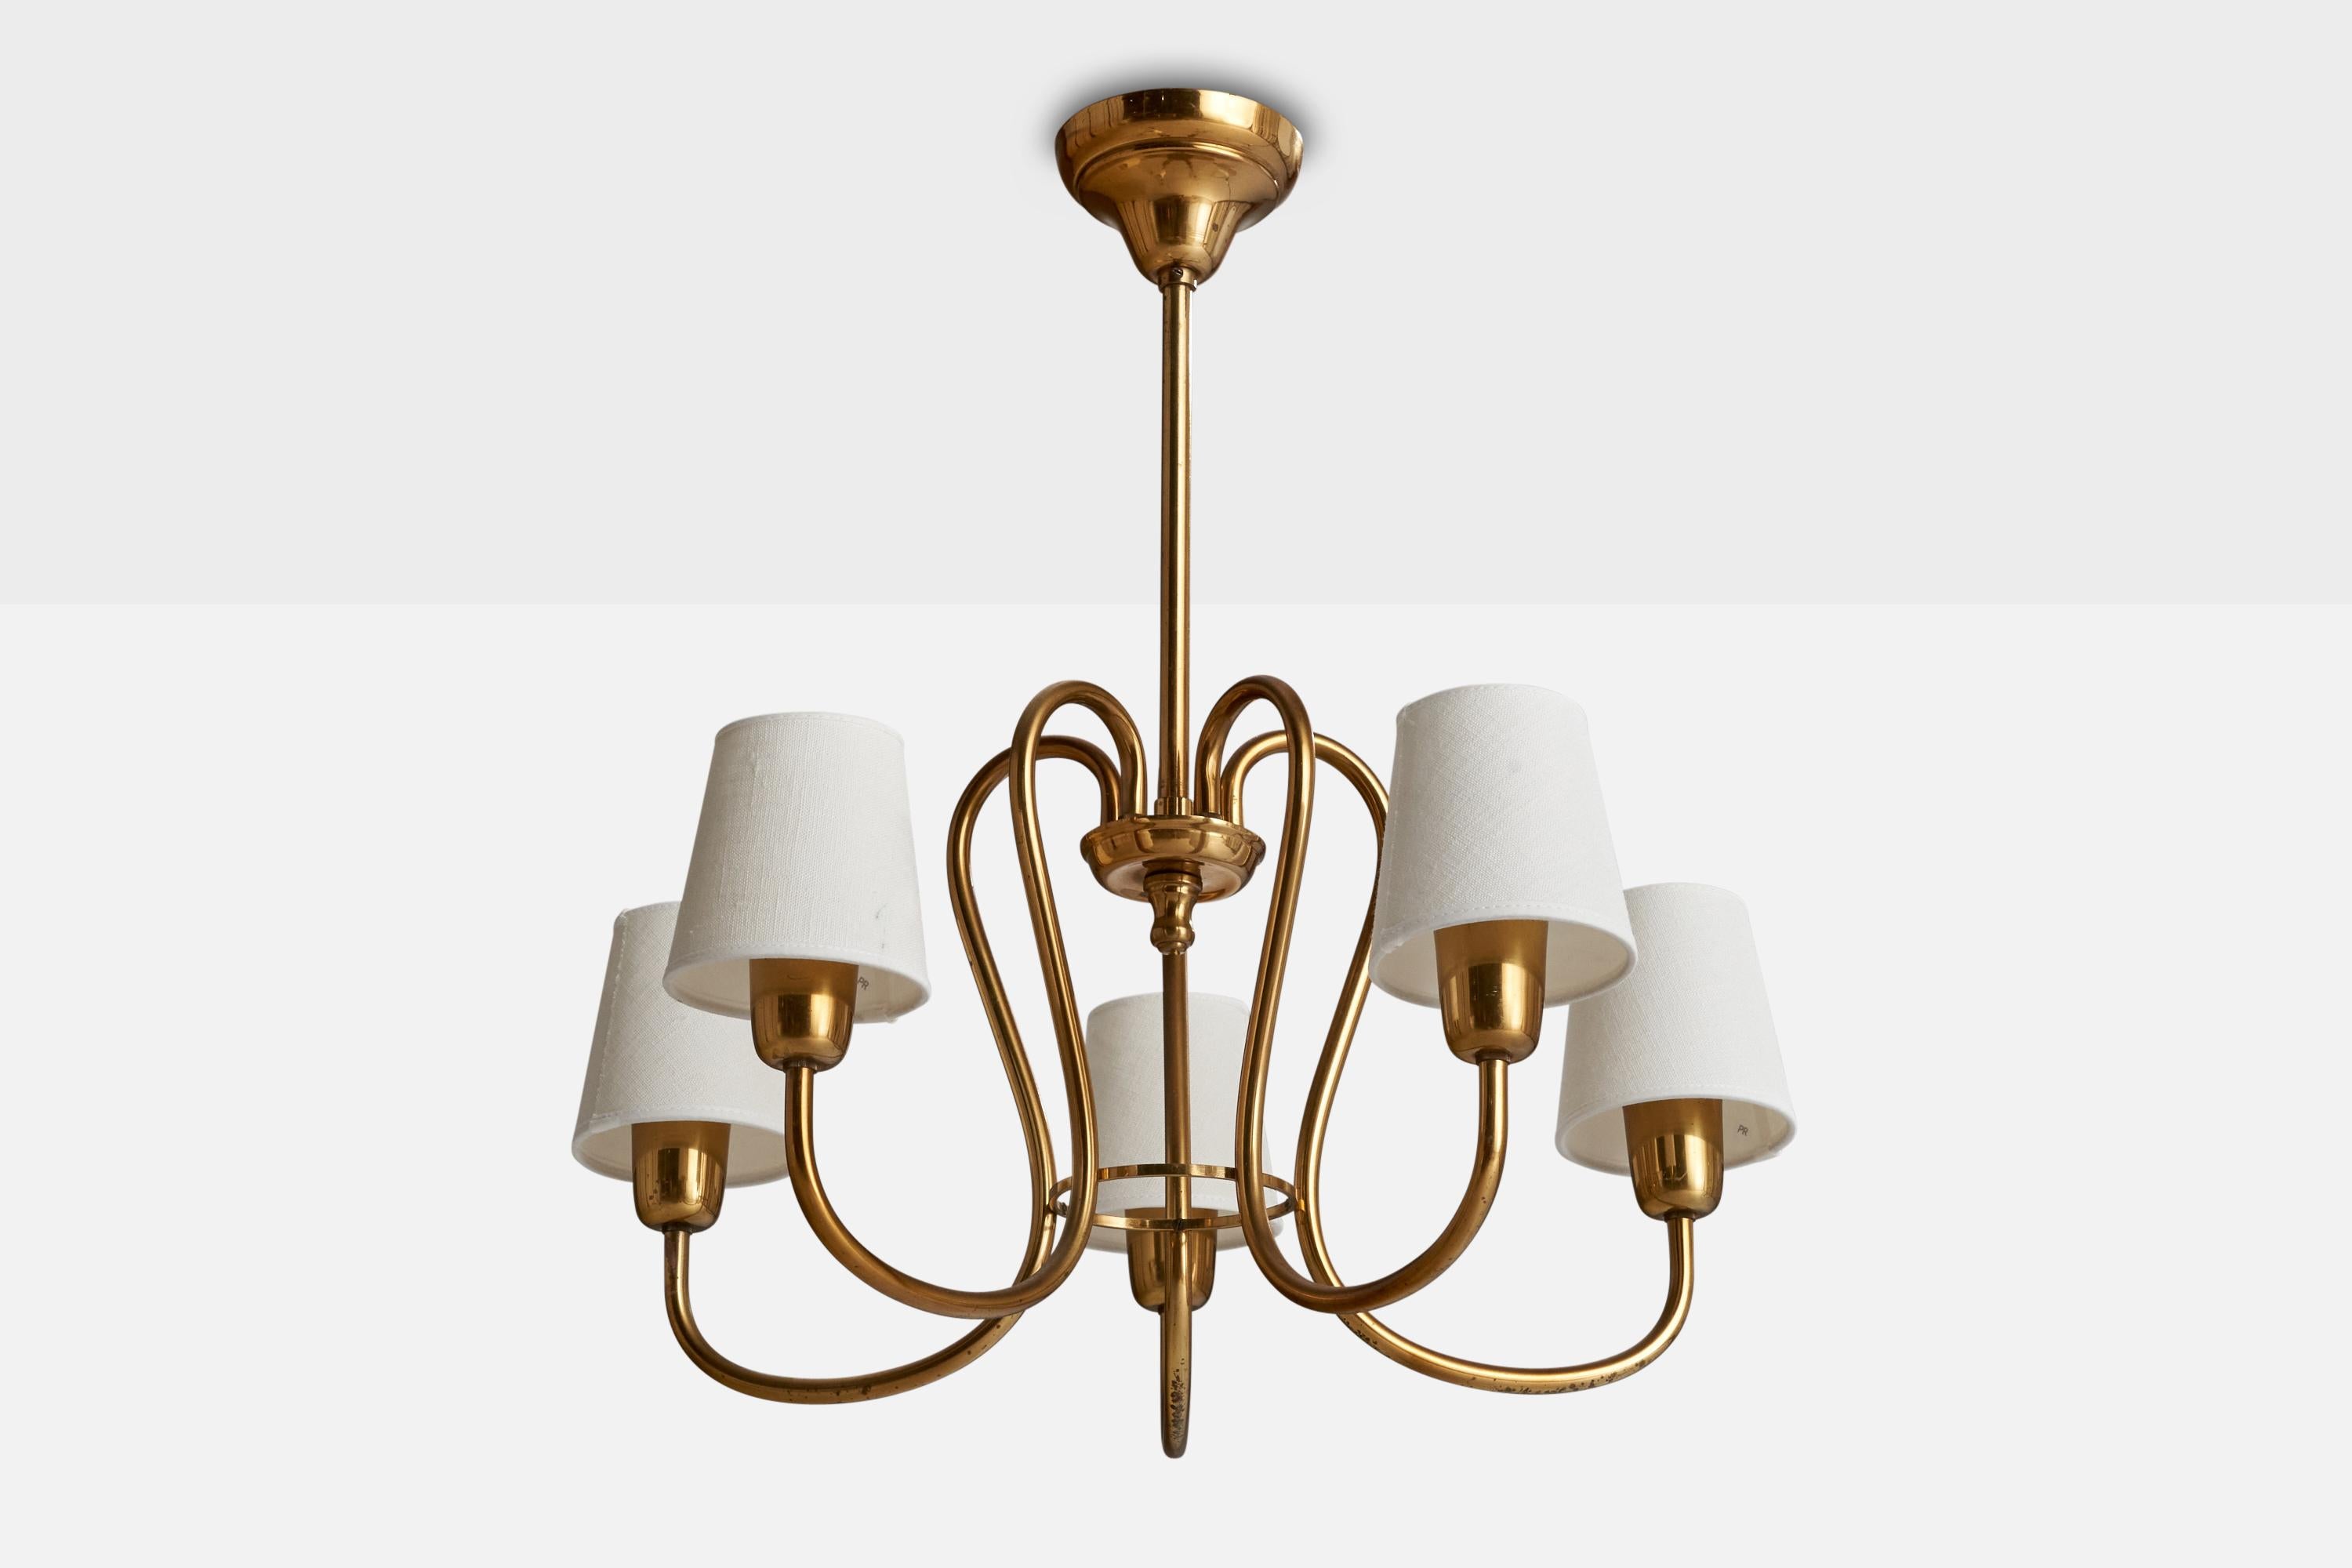 A brass and white fabric chandelier designed and produced in Sweden, c. 1940s.

Dimensions of canopy (inches): 4.28” H x 2.88” Diameter
Socket takes standard E-26 bulbs. 5 socket.There is no maximum wattage stated on the fixture. All lighting will